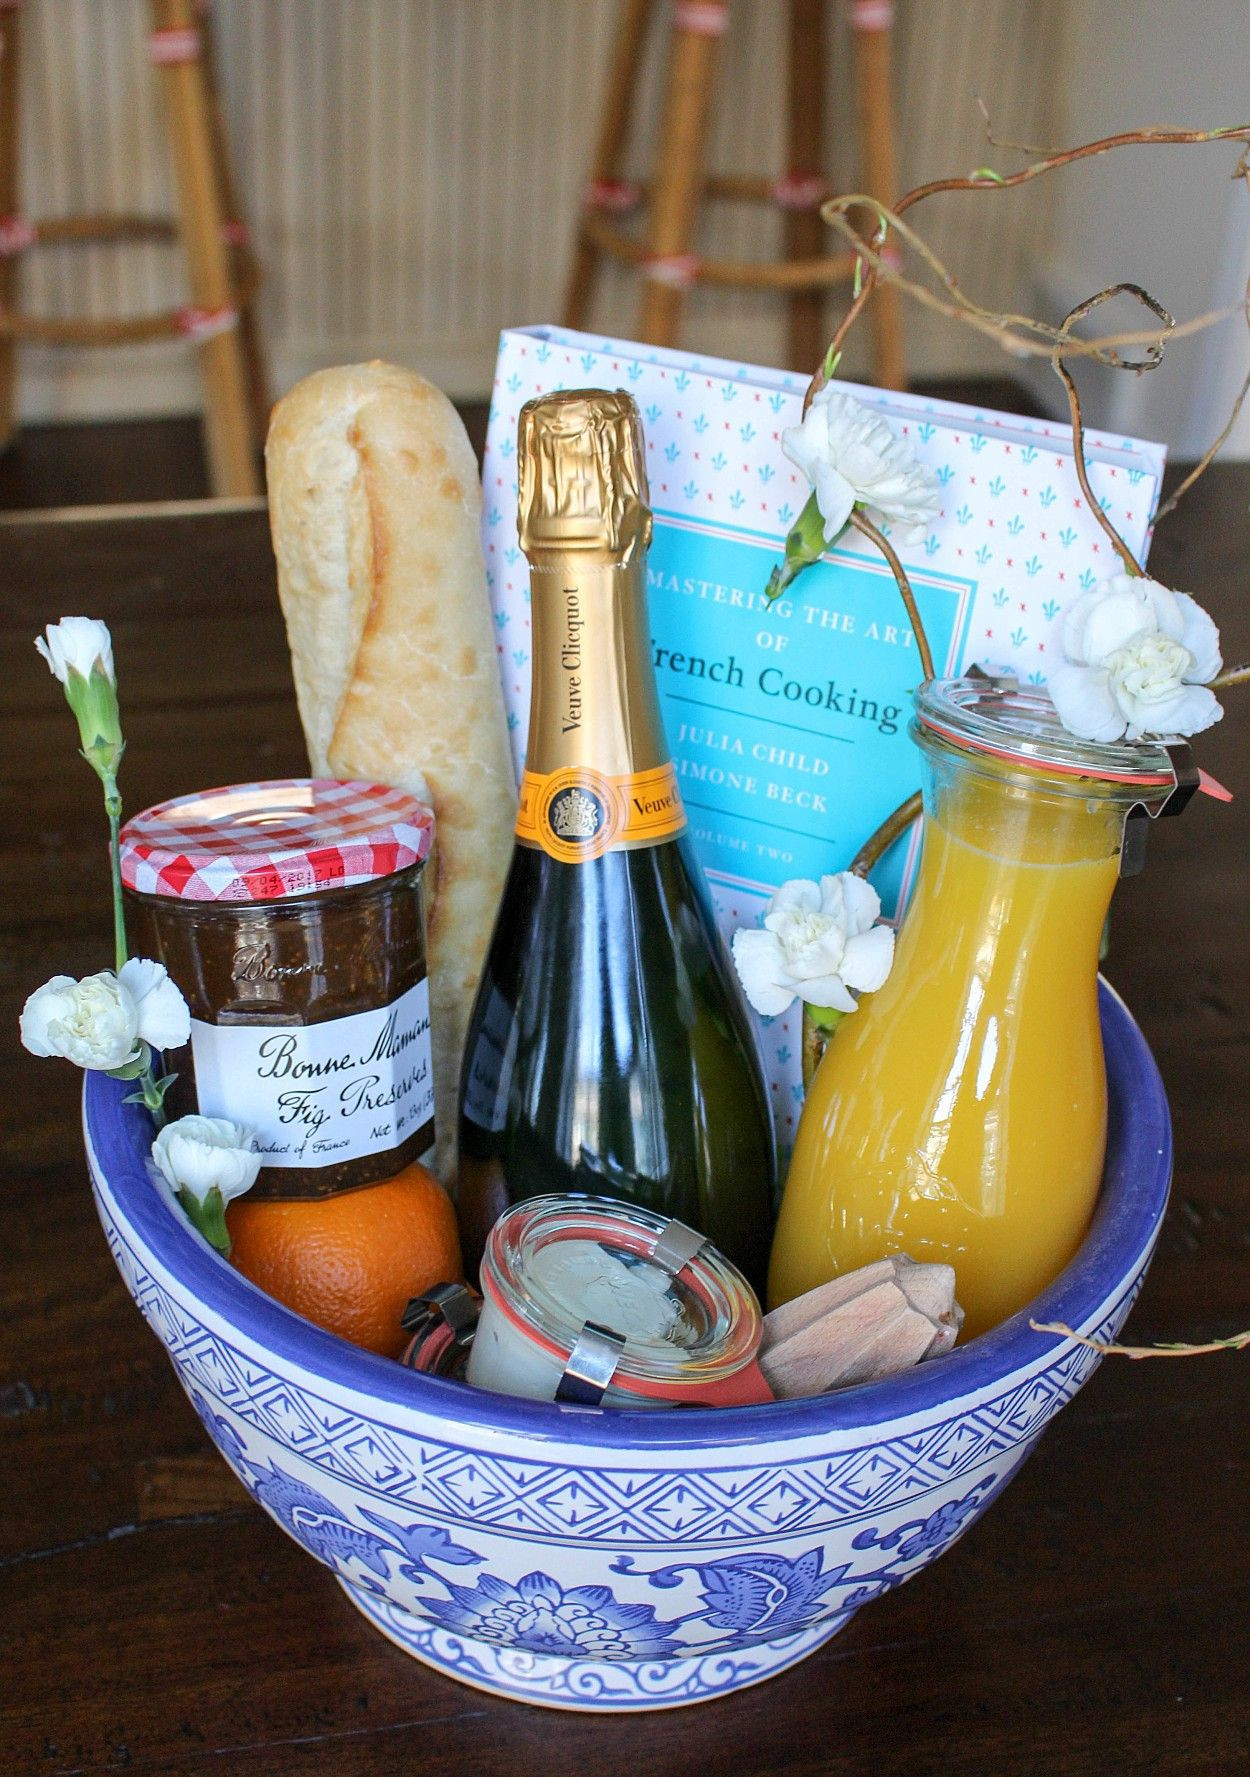 Christmas Party Host Gift Ideas
 An Edible Gift Basket Inspired by the Beauty of Provence